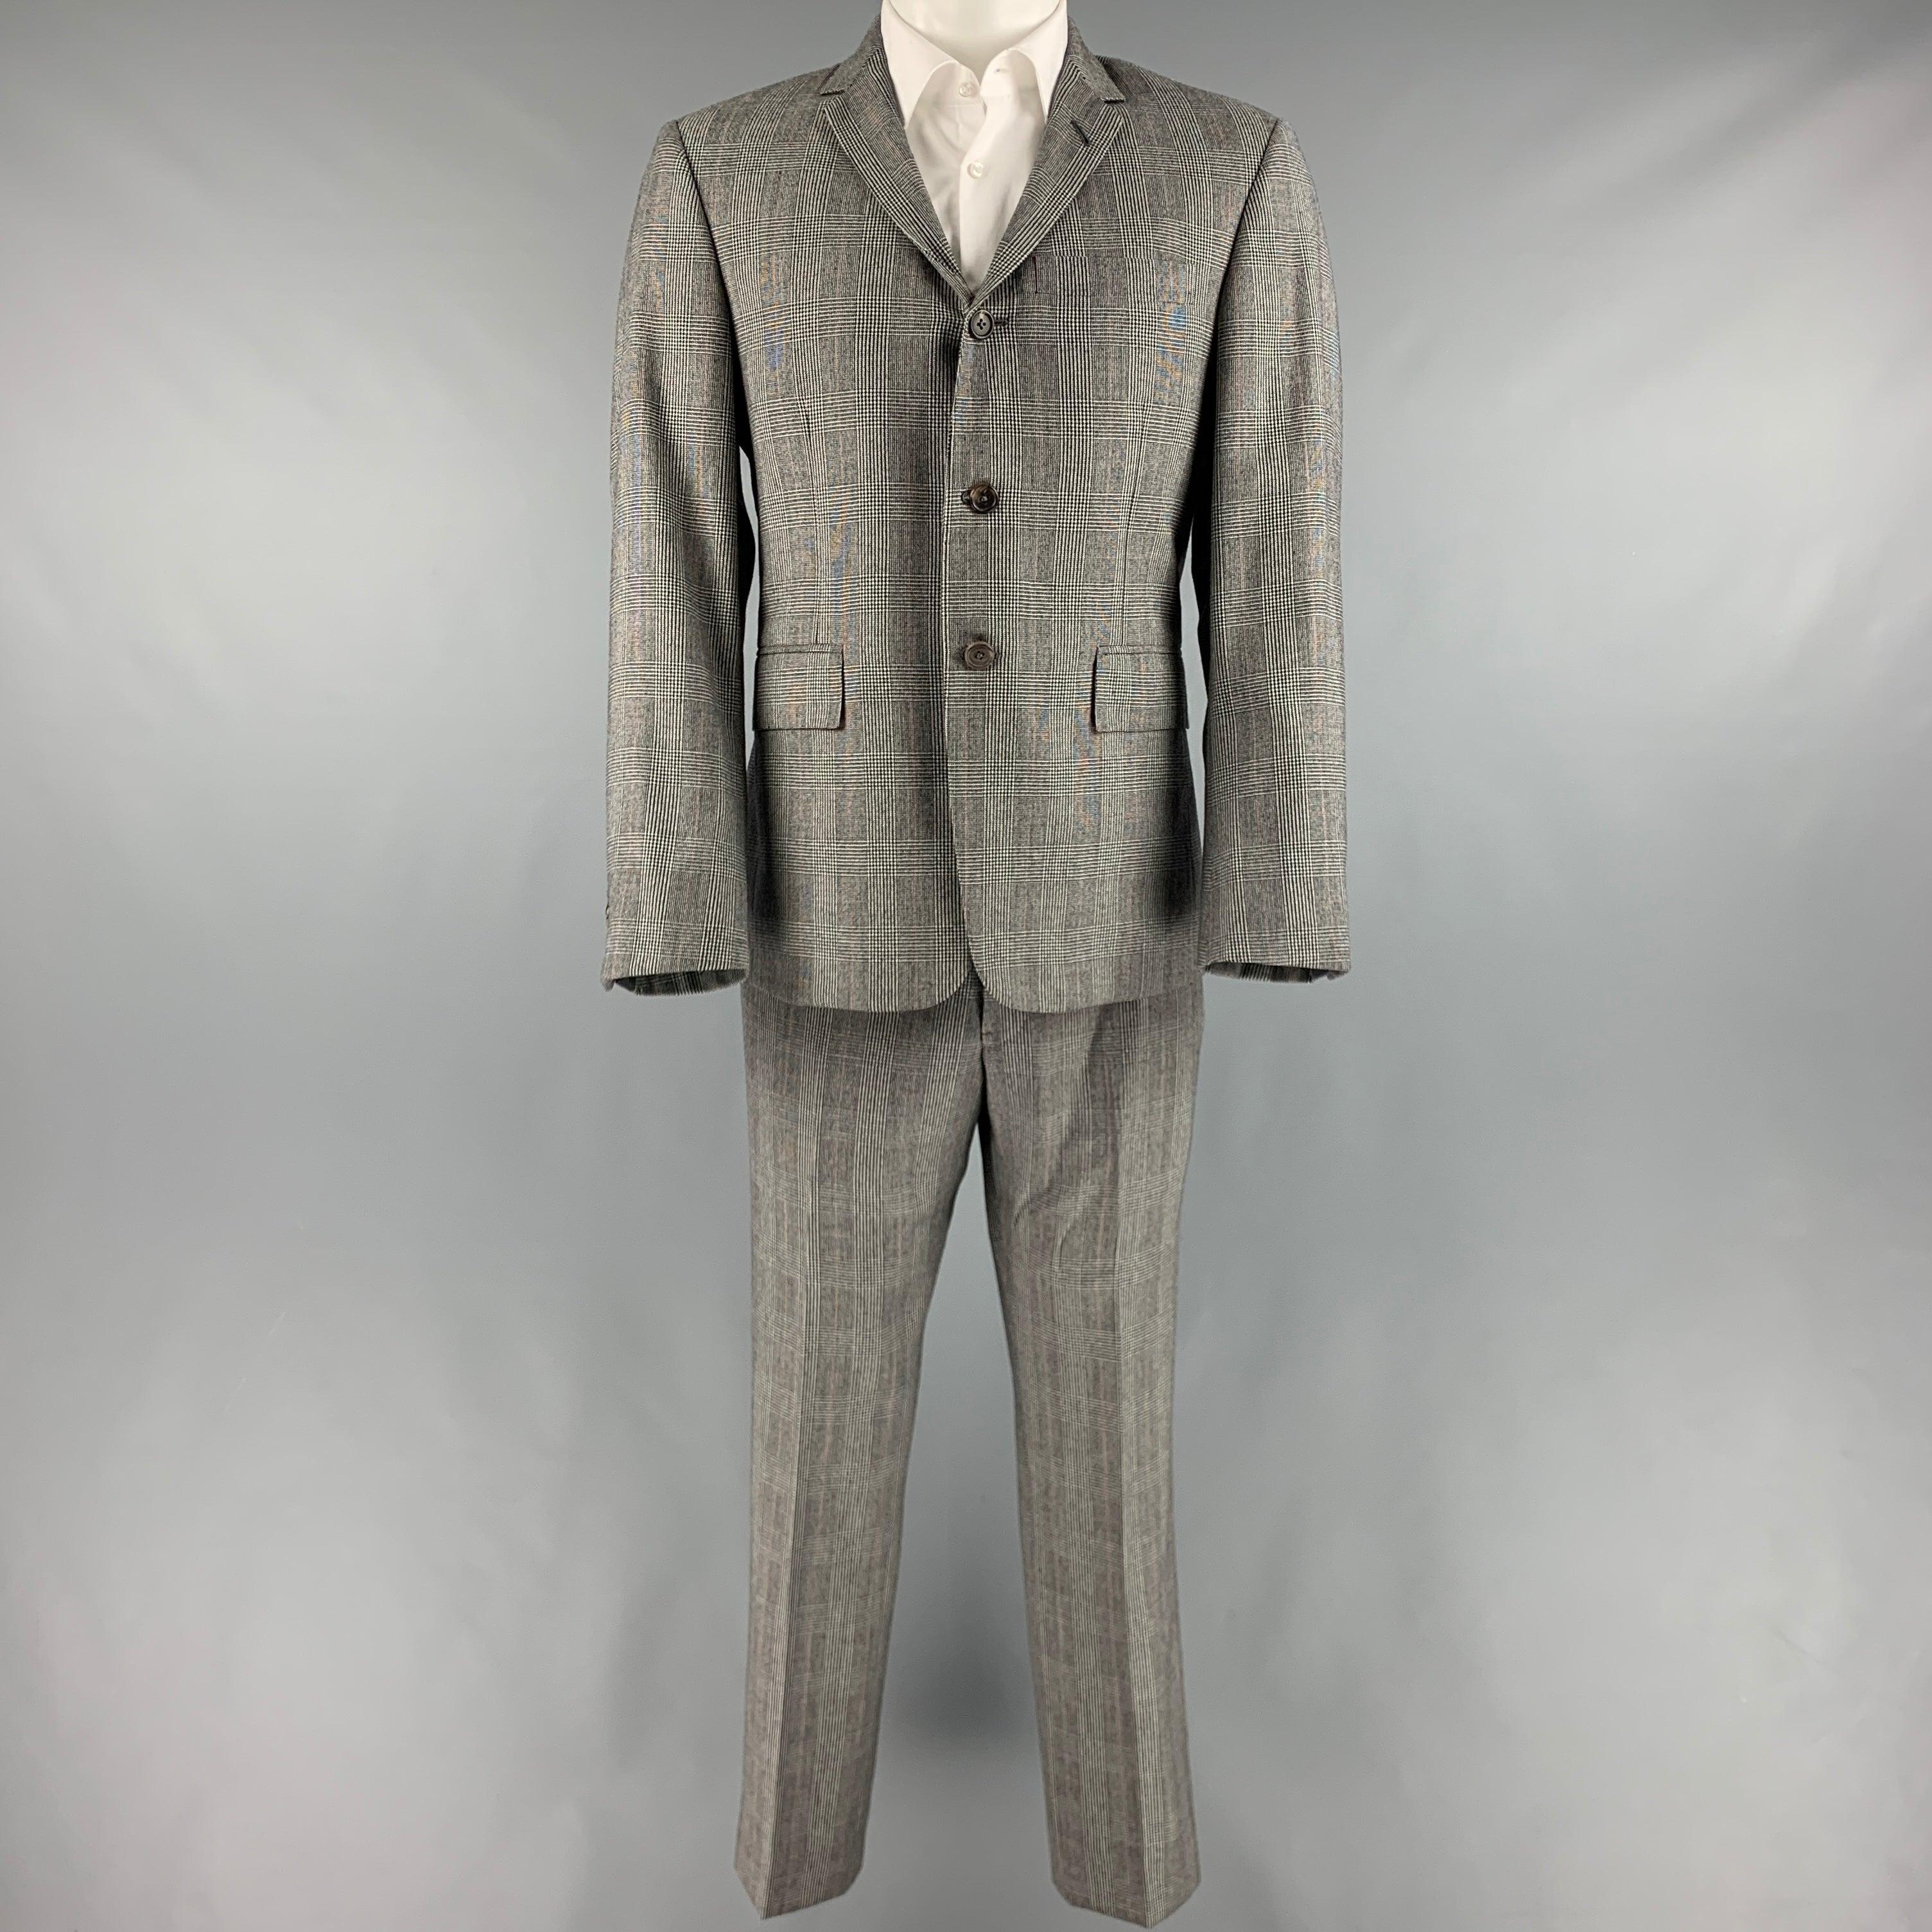 THOM BROWNE for BARNEY'S suit
in a black and white wool with a full liner and includes a single breasted, three button sport coat with notch lapel and matching flat front trousers.
Handmade in USA.Excellent Pre-Owned Condition. 

Marked:   2